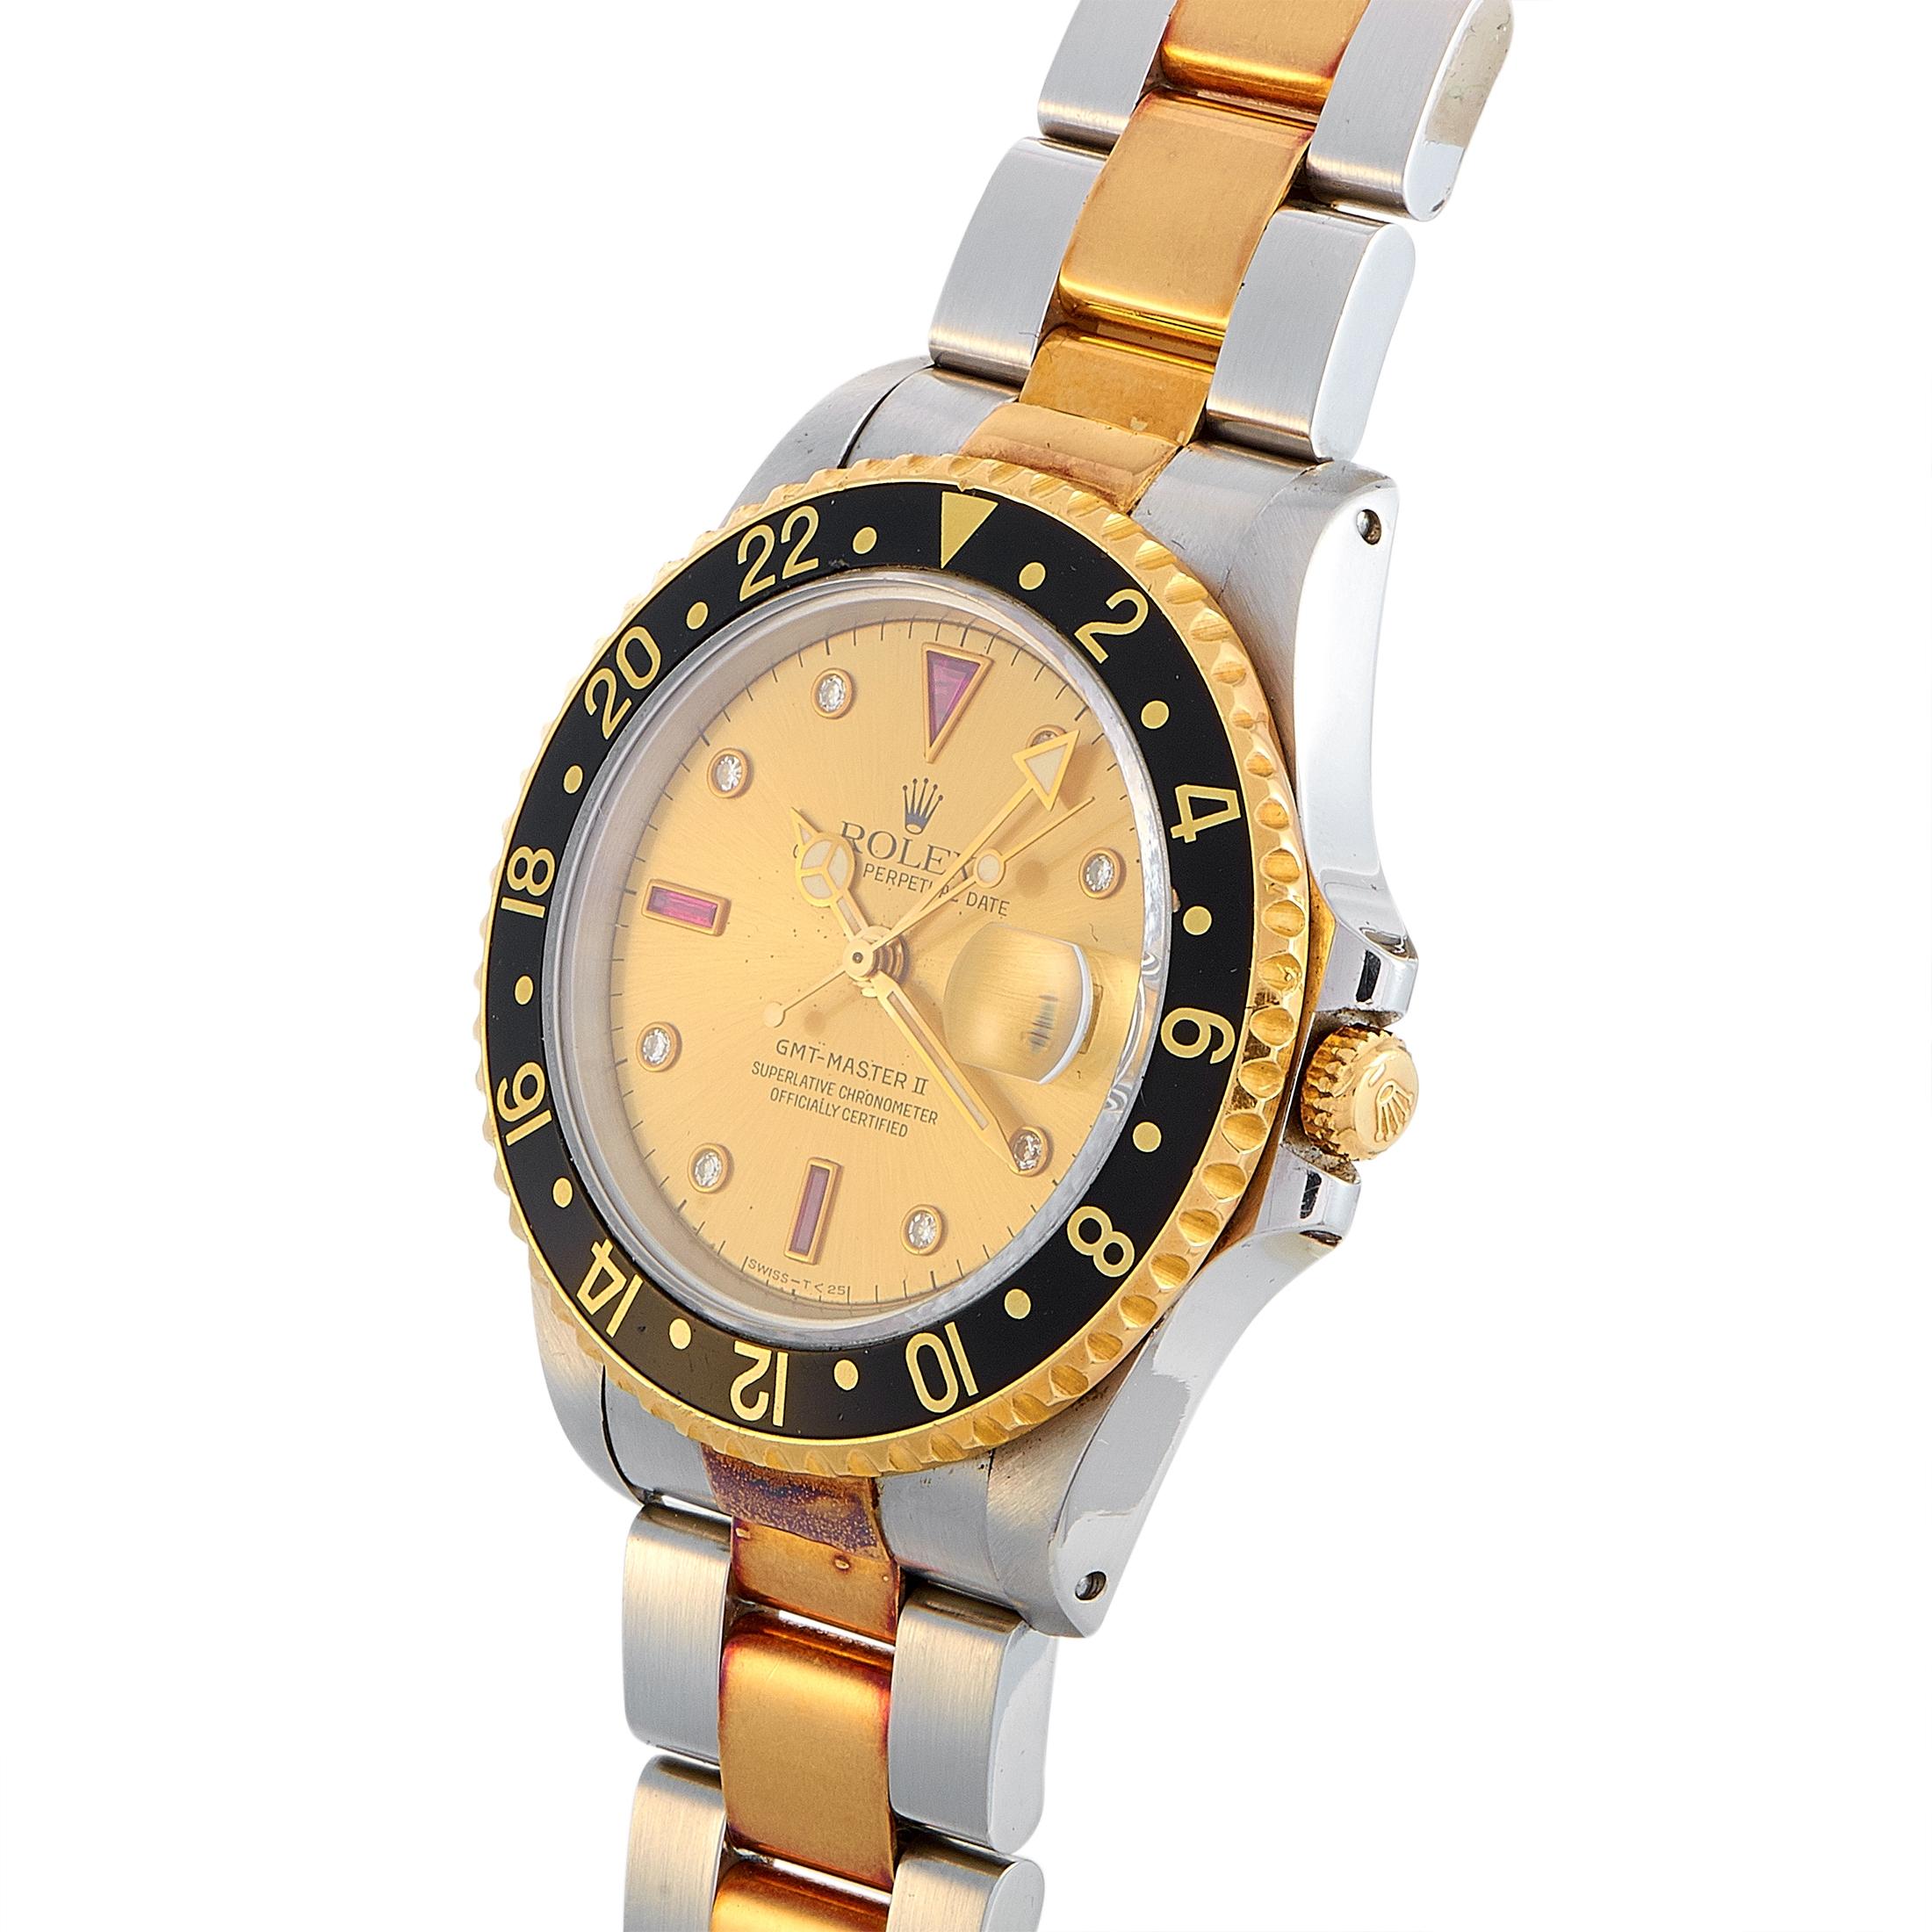 The Rolex GMT-Master II watch, reference number 16713, is a member of the superb “GMT-Master II” collection.

This model boasts a 40 mm stainless steel case that is fitted with an 18K yellow gold bezel. The case is water-resistant to 100 meters and